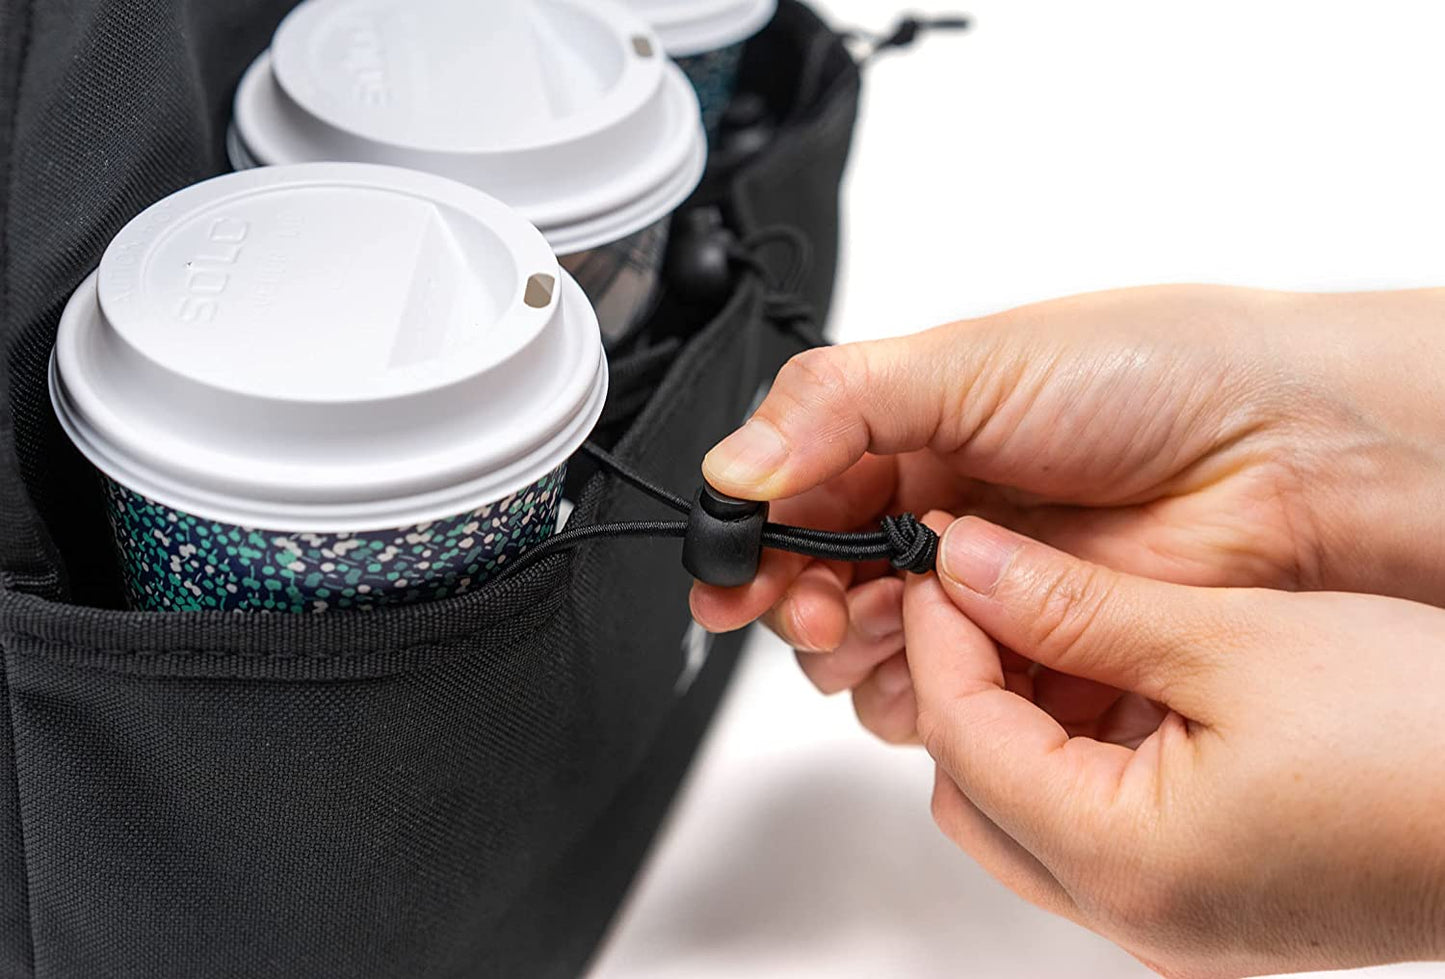 Collapsible Reusable Coffee Cup Holder Holds 6 Cups or Cans for Traveling